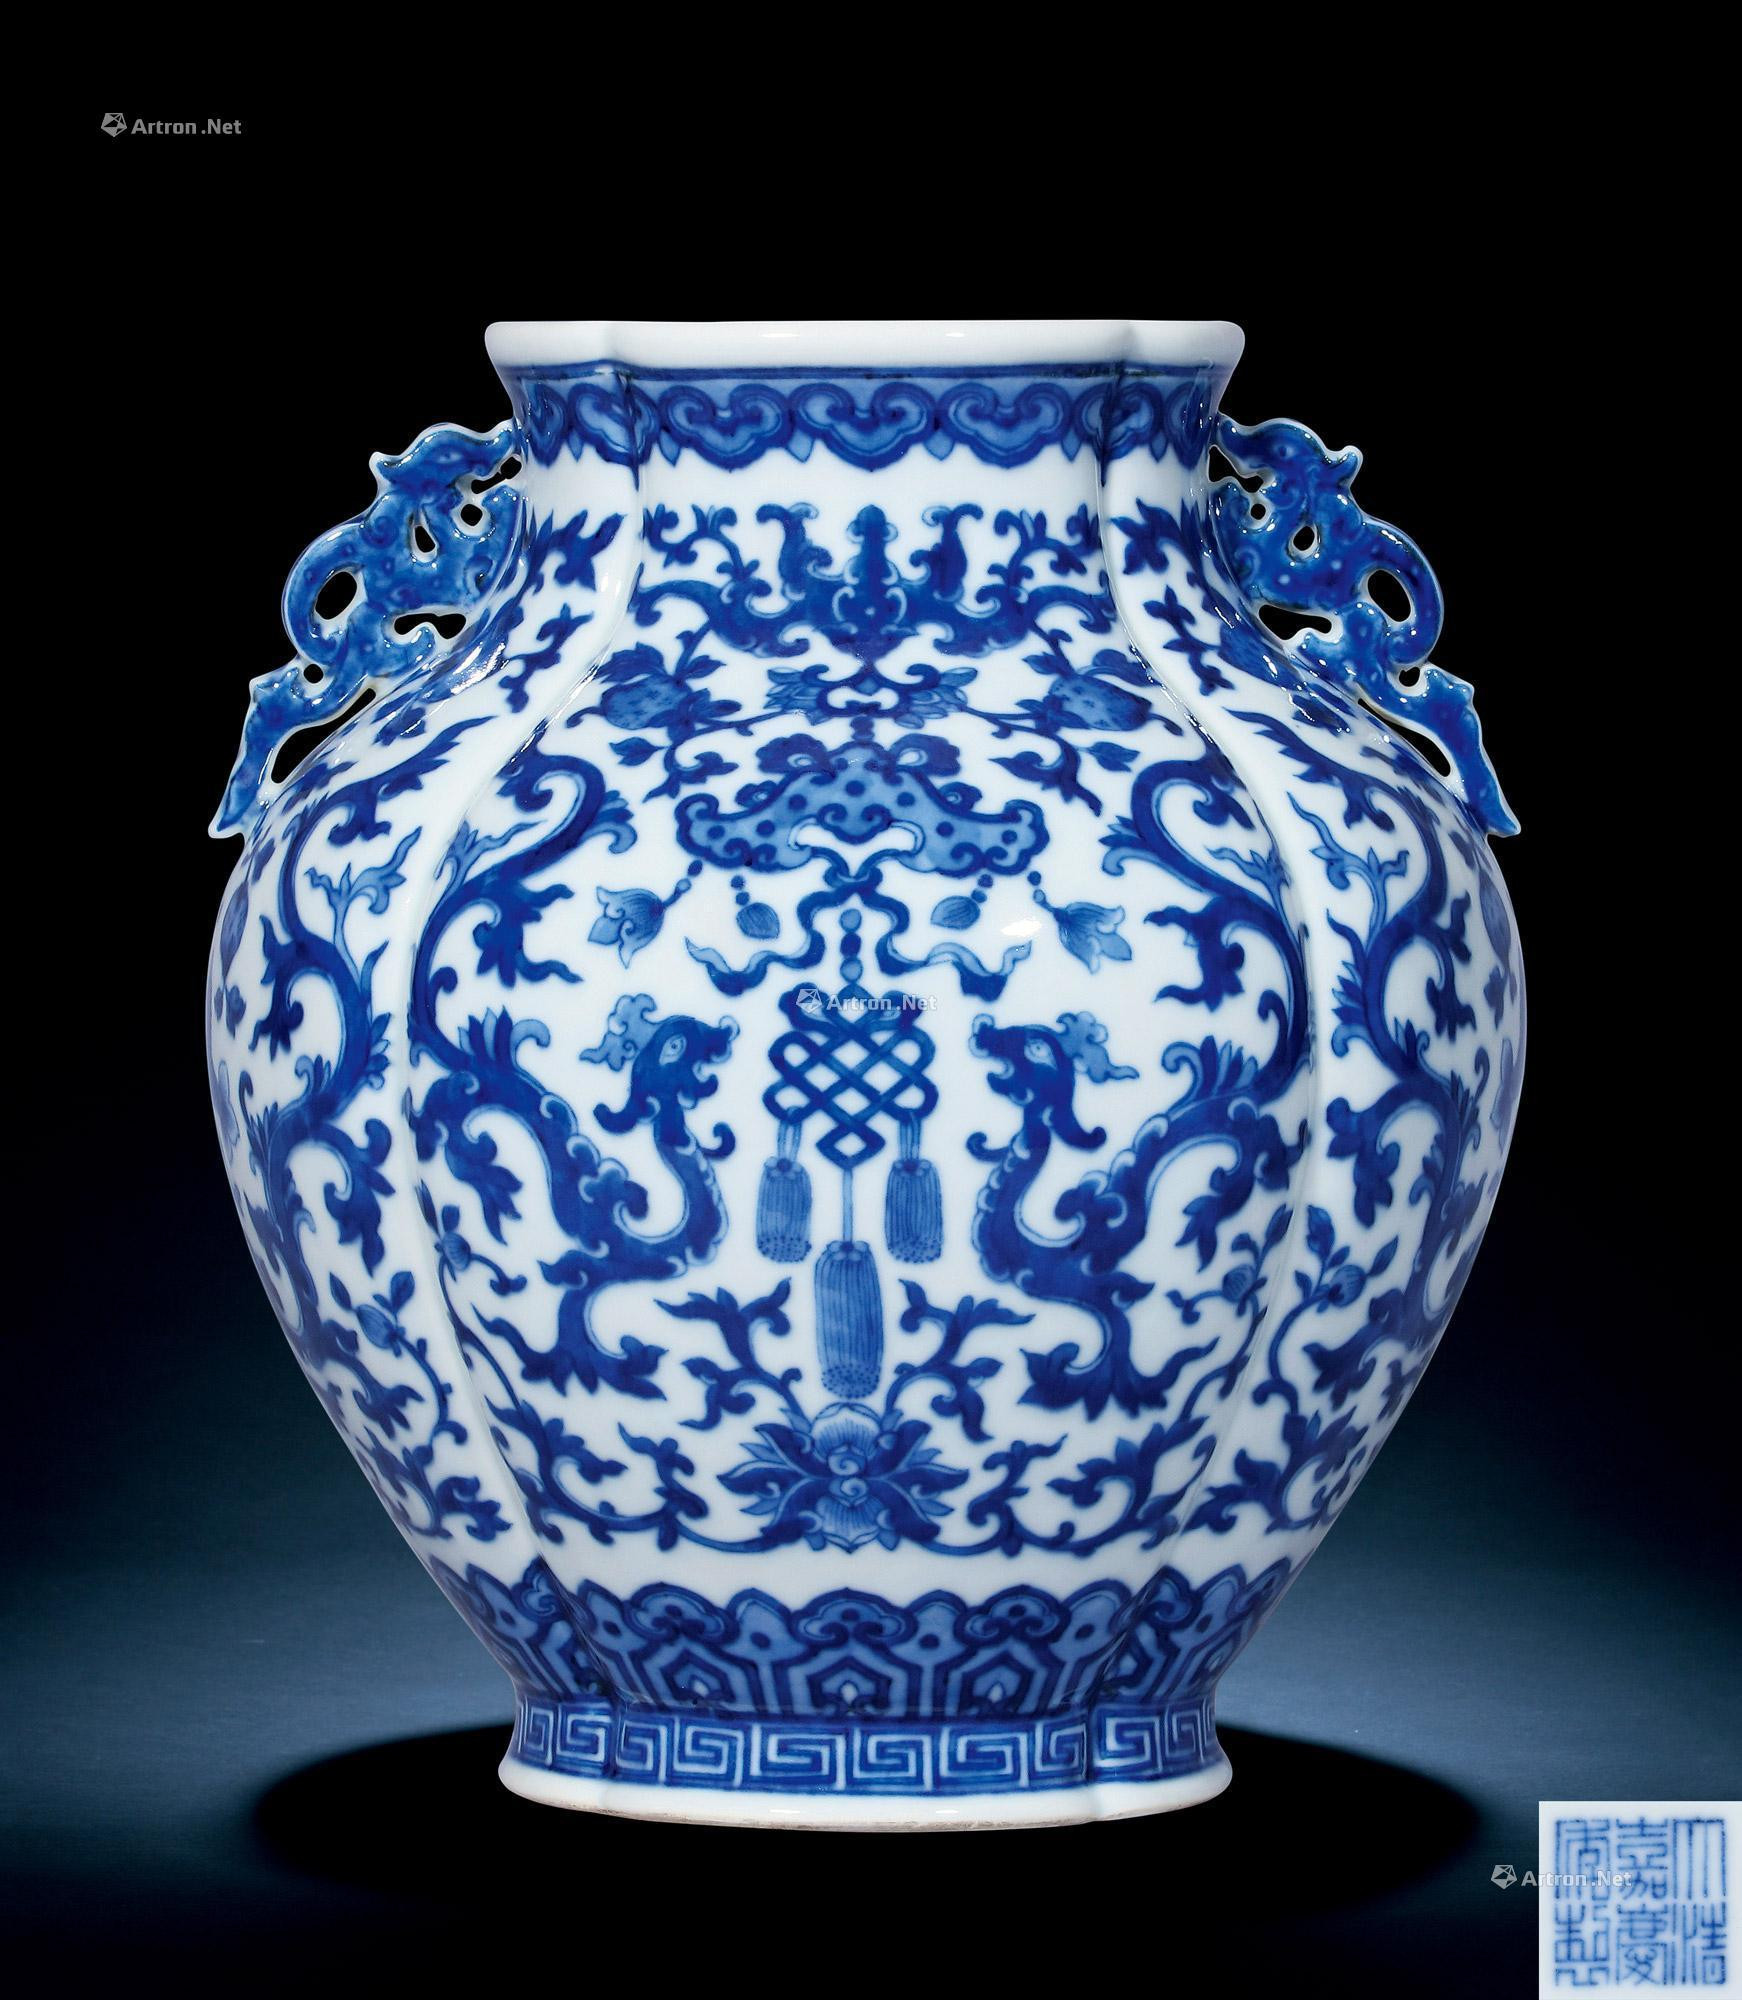 A RARE BLUE AND WHITE‘KUI-DRAGON’ AND‘EIGHT BUDDHIST EMBLEMS’ VASE